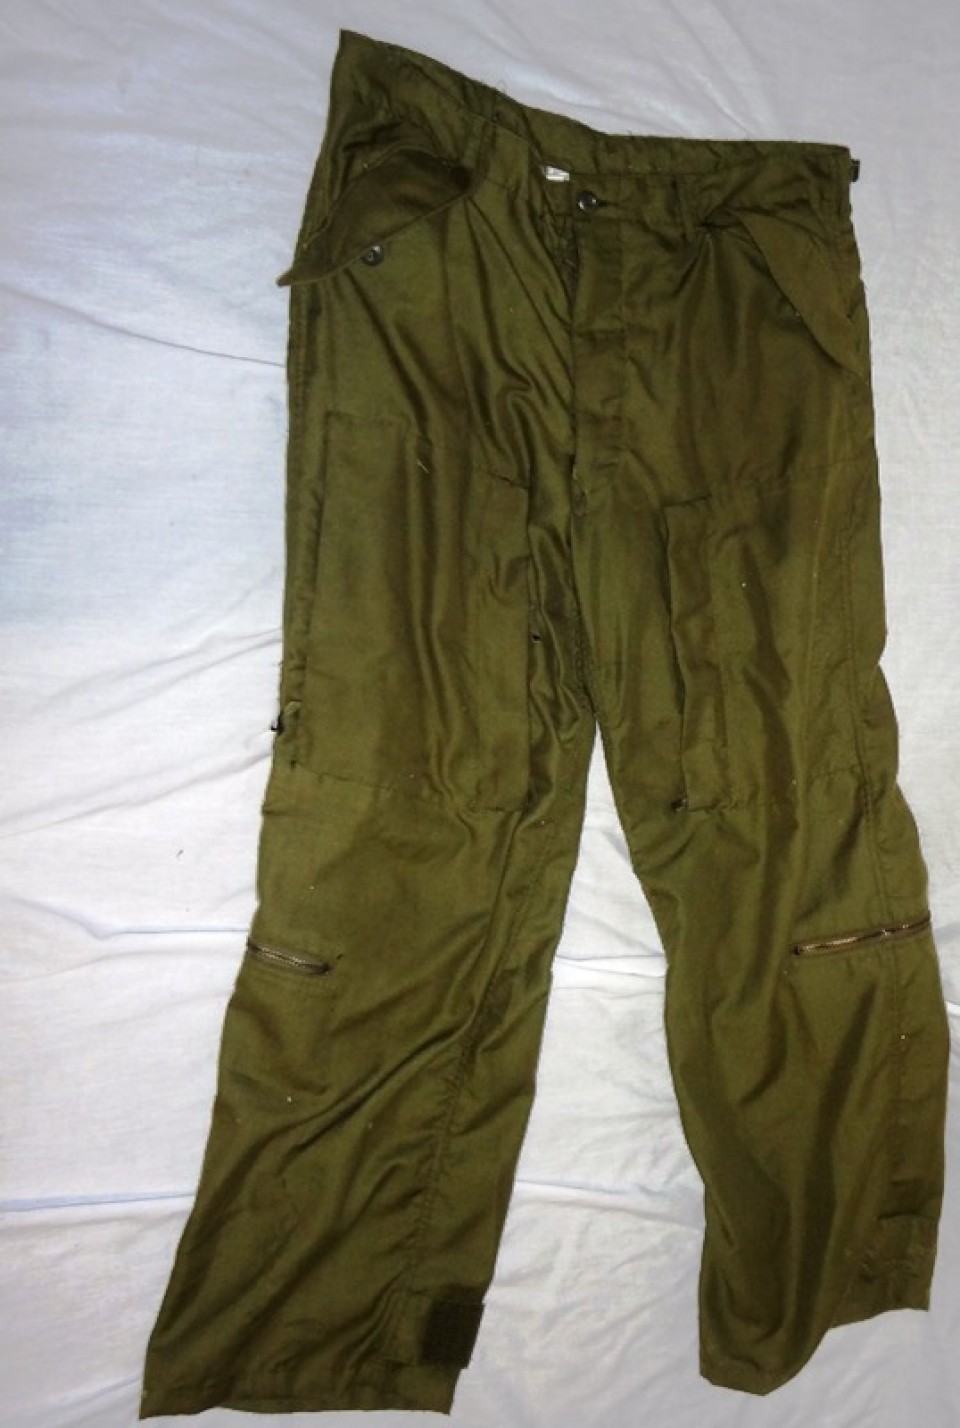 Trousers, Flyer's, Hot Weather, Fire Resistent (LR)